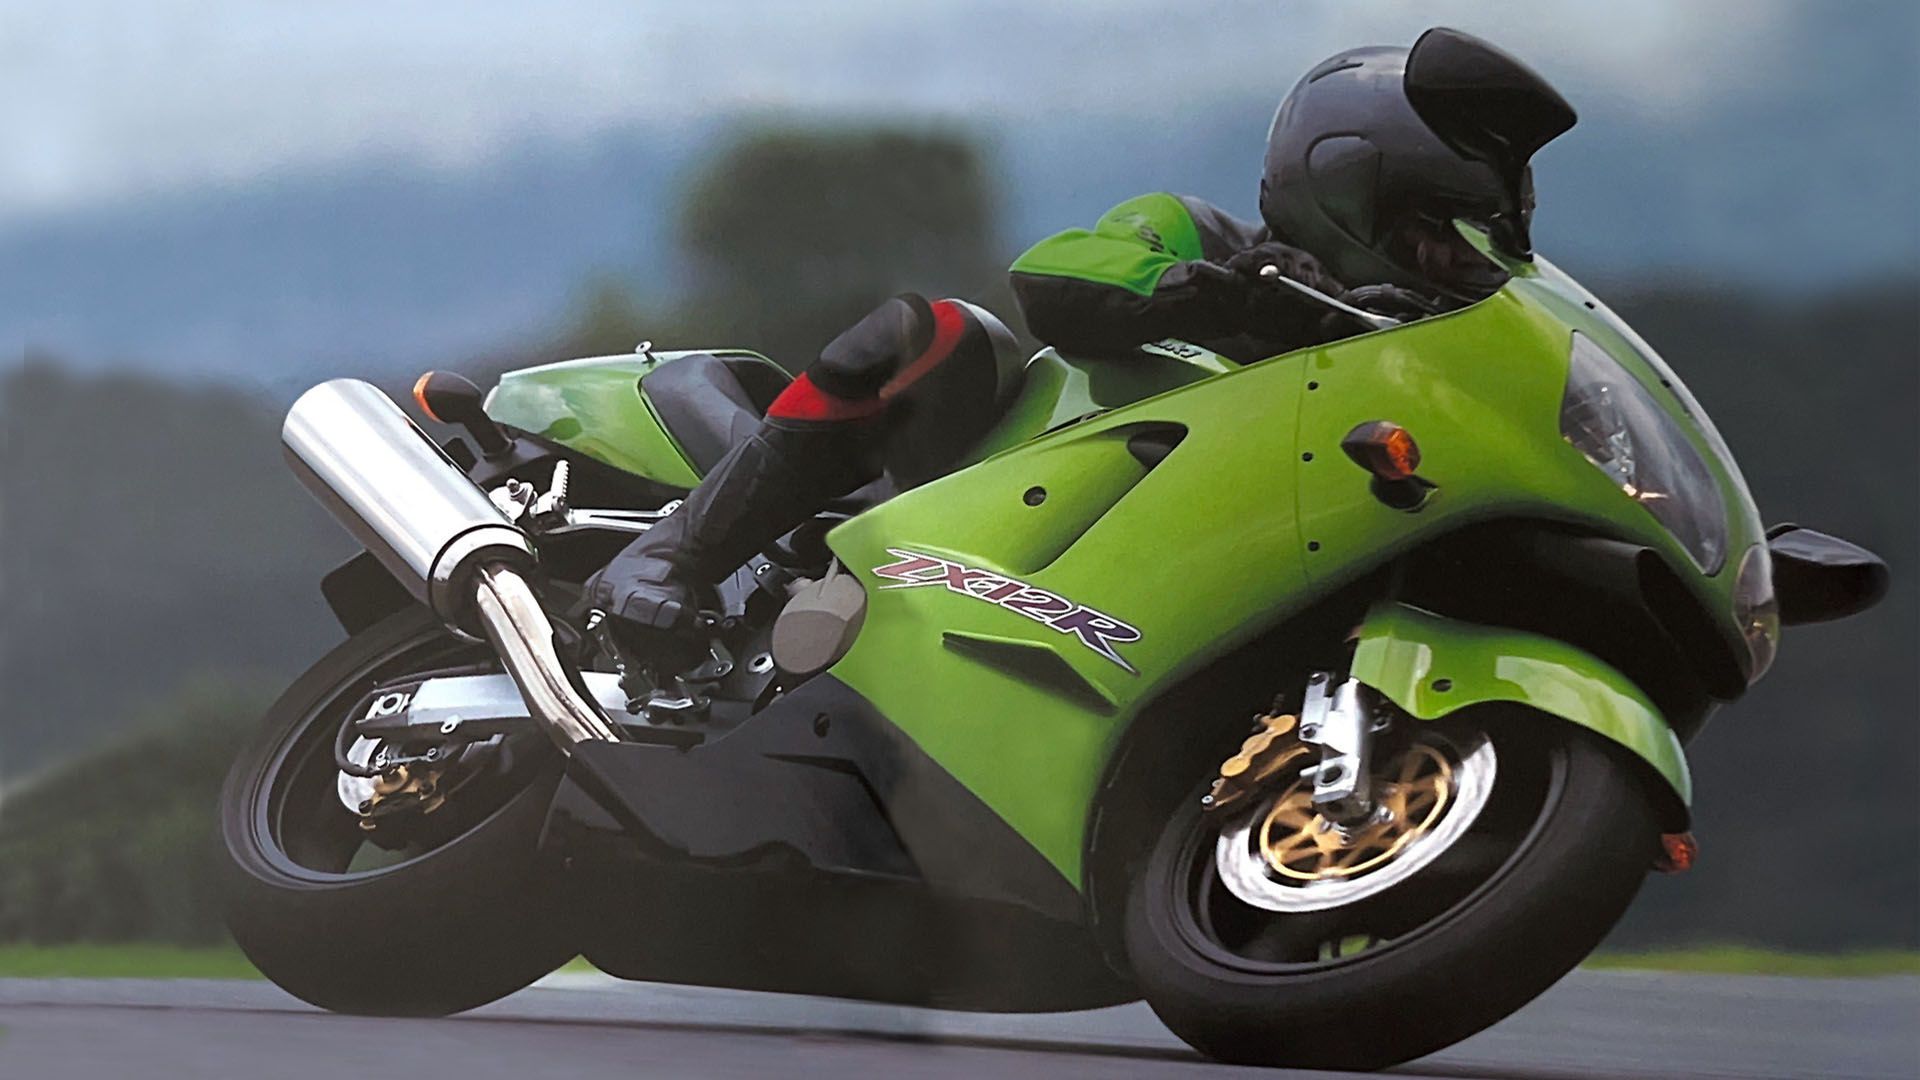 Testing Time. A Kawasaki Ninja ZX-12R Being Put Through The Paces